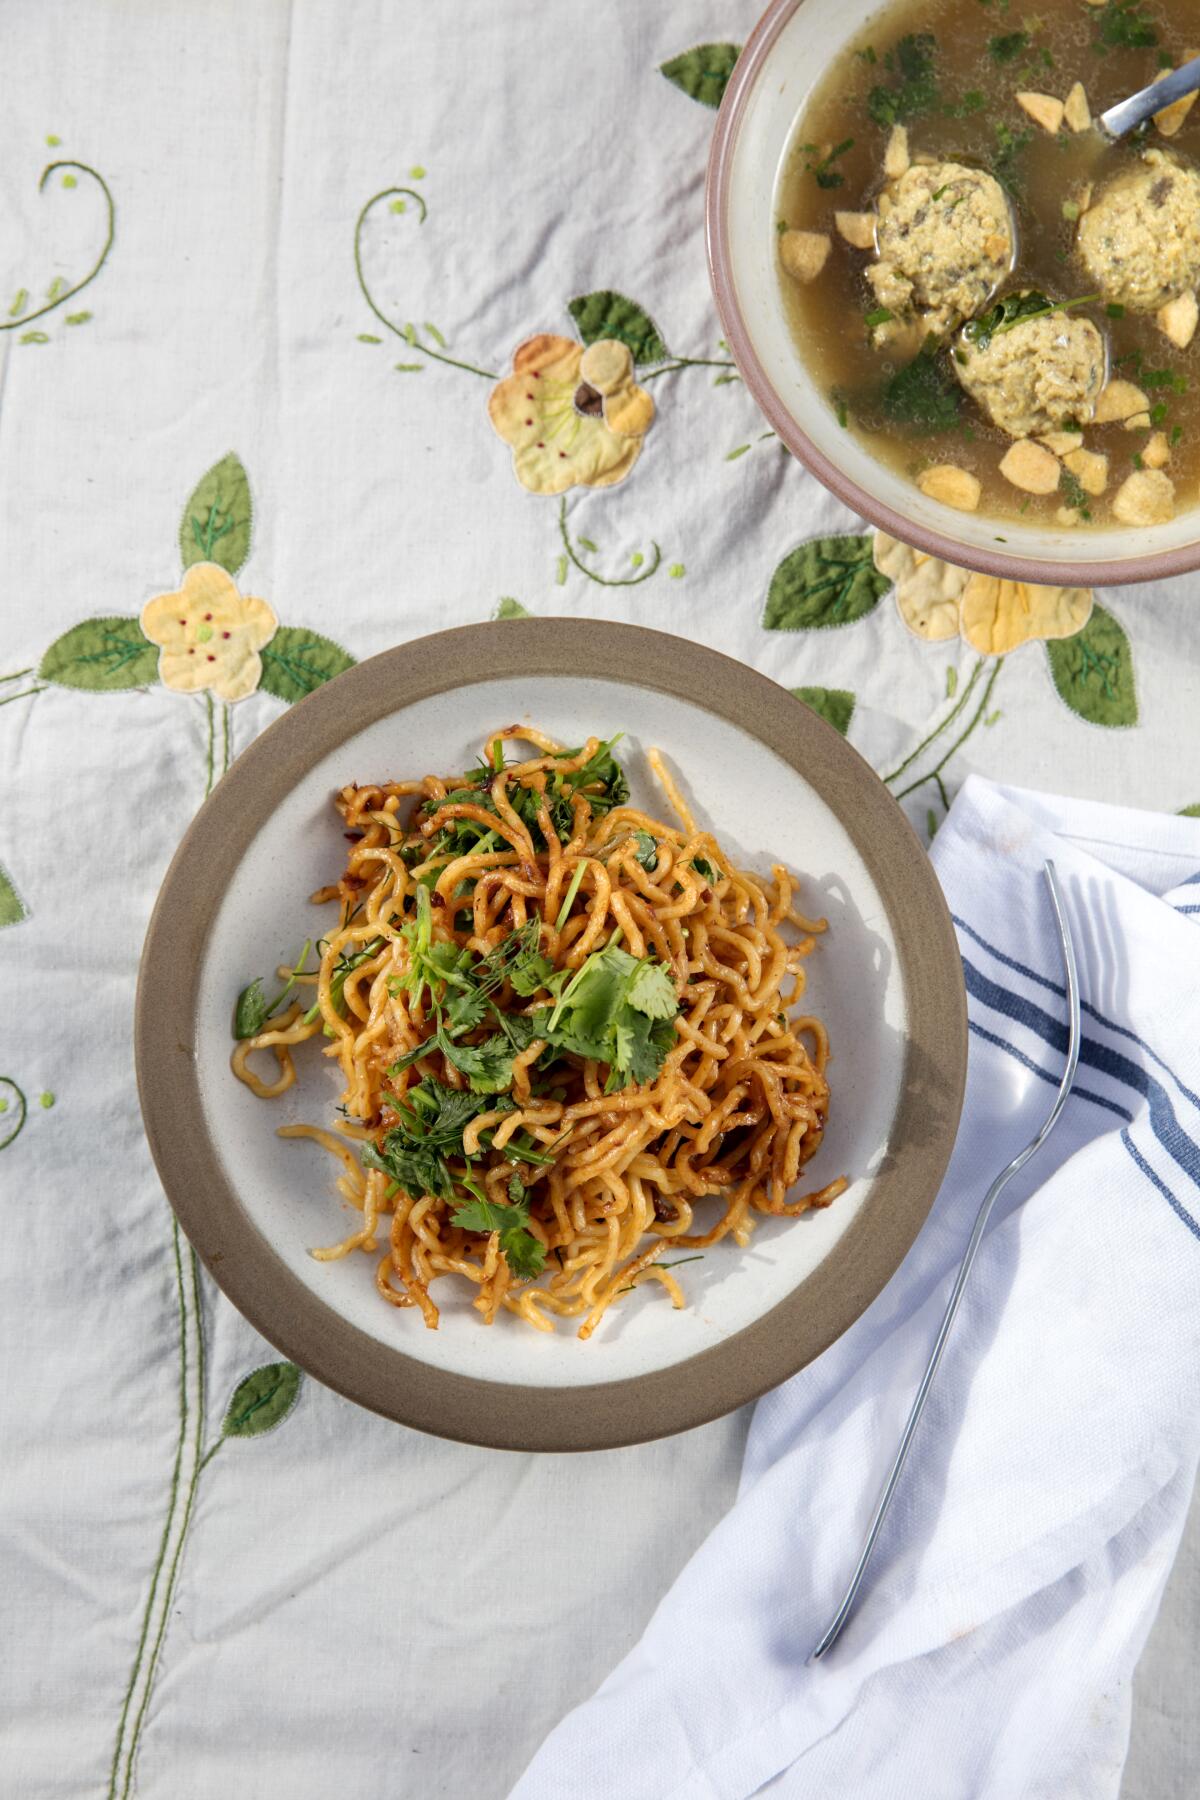 The noodles are tasty on their own and even more delicious when served with broth for dipping.